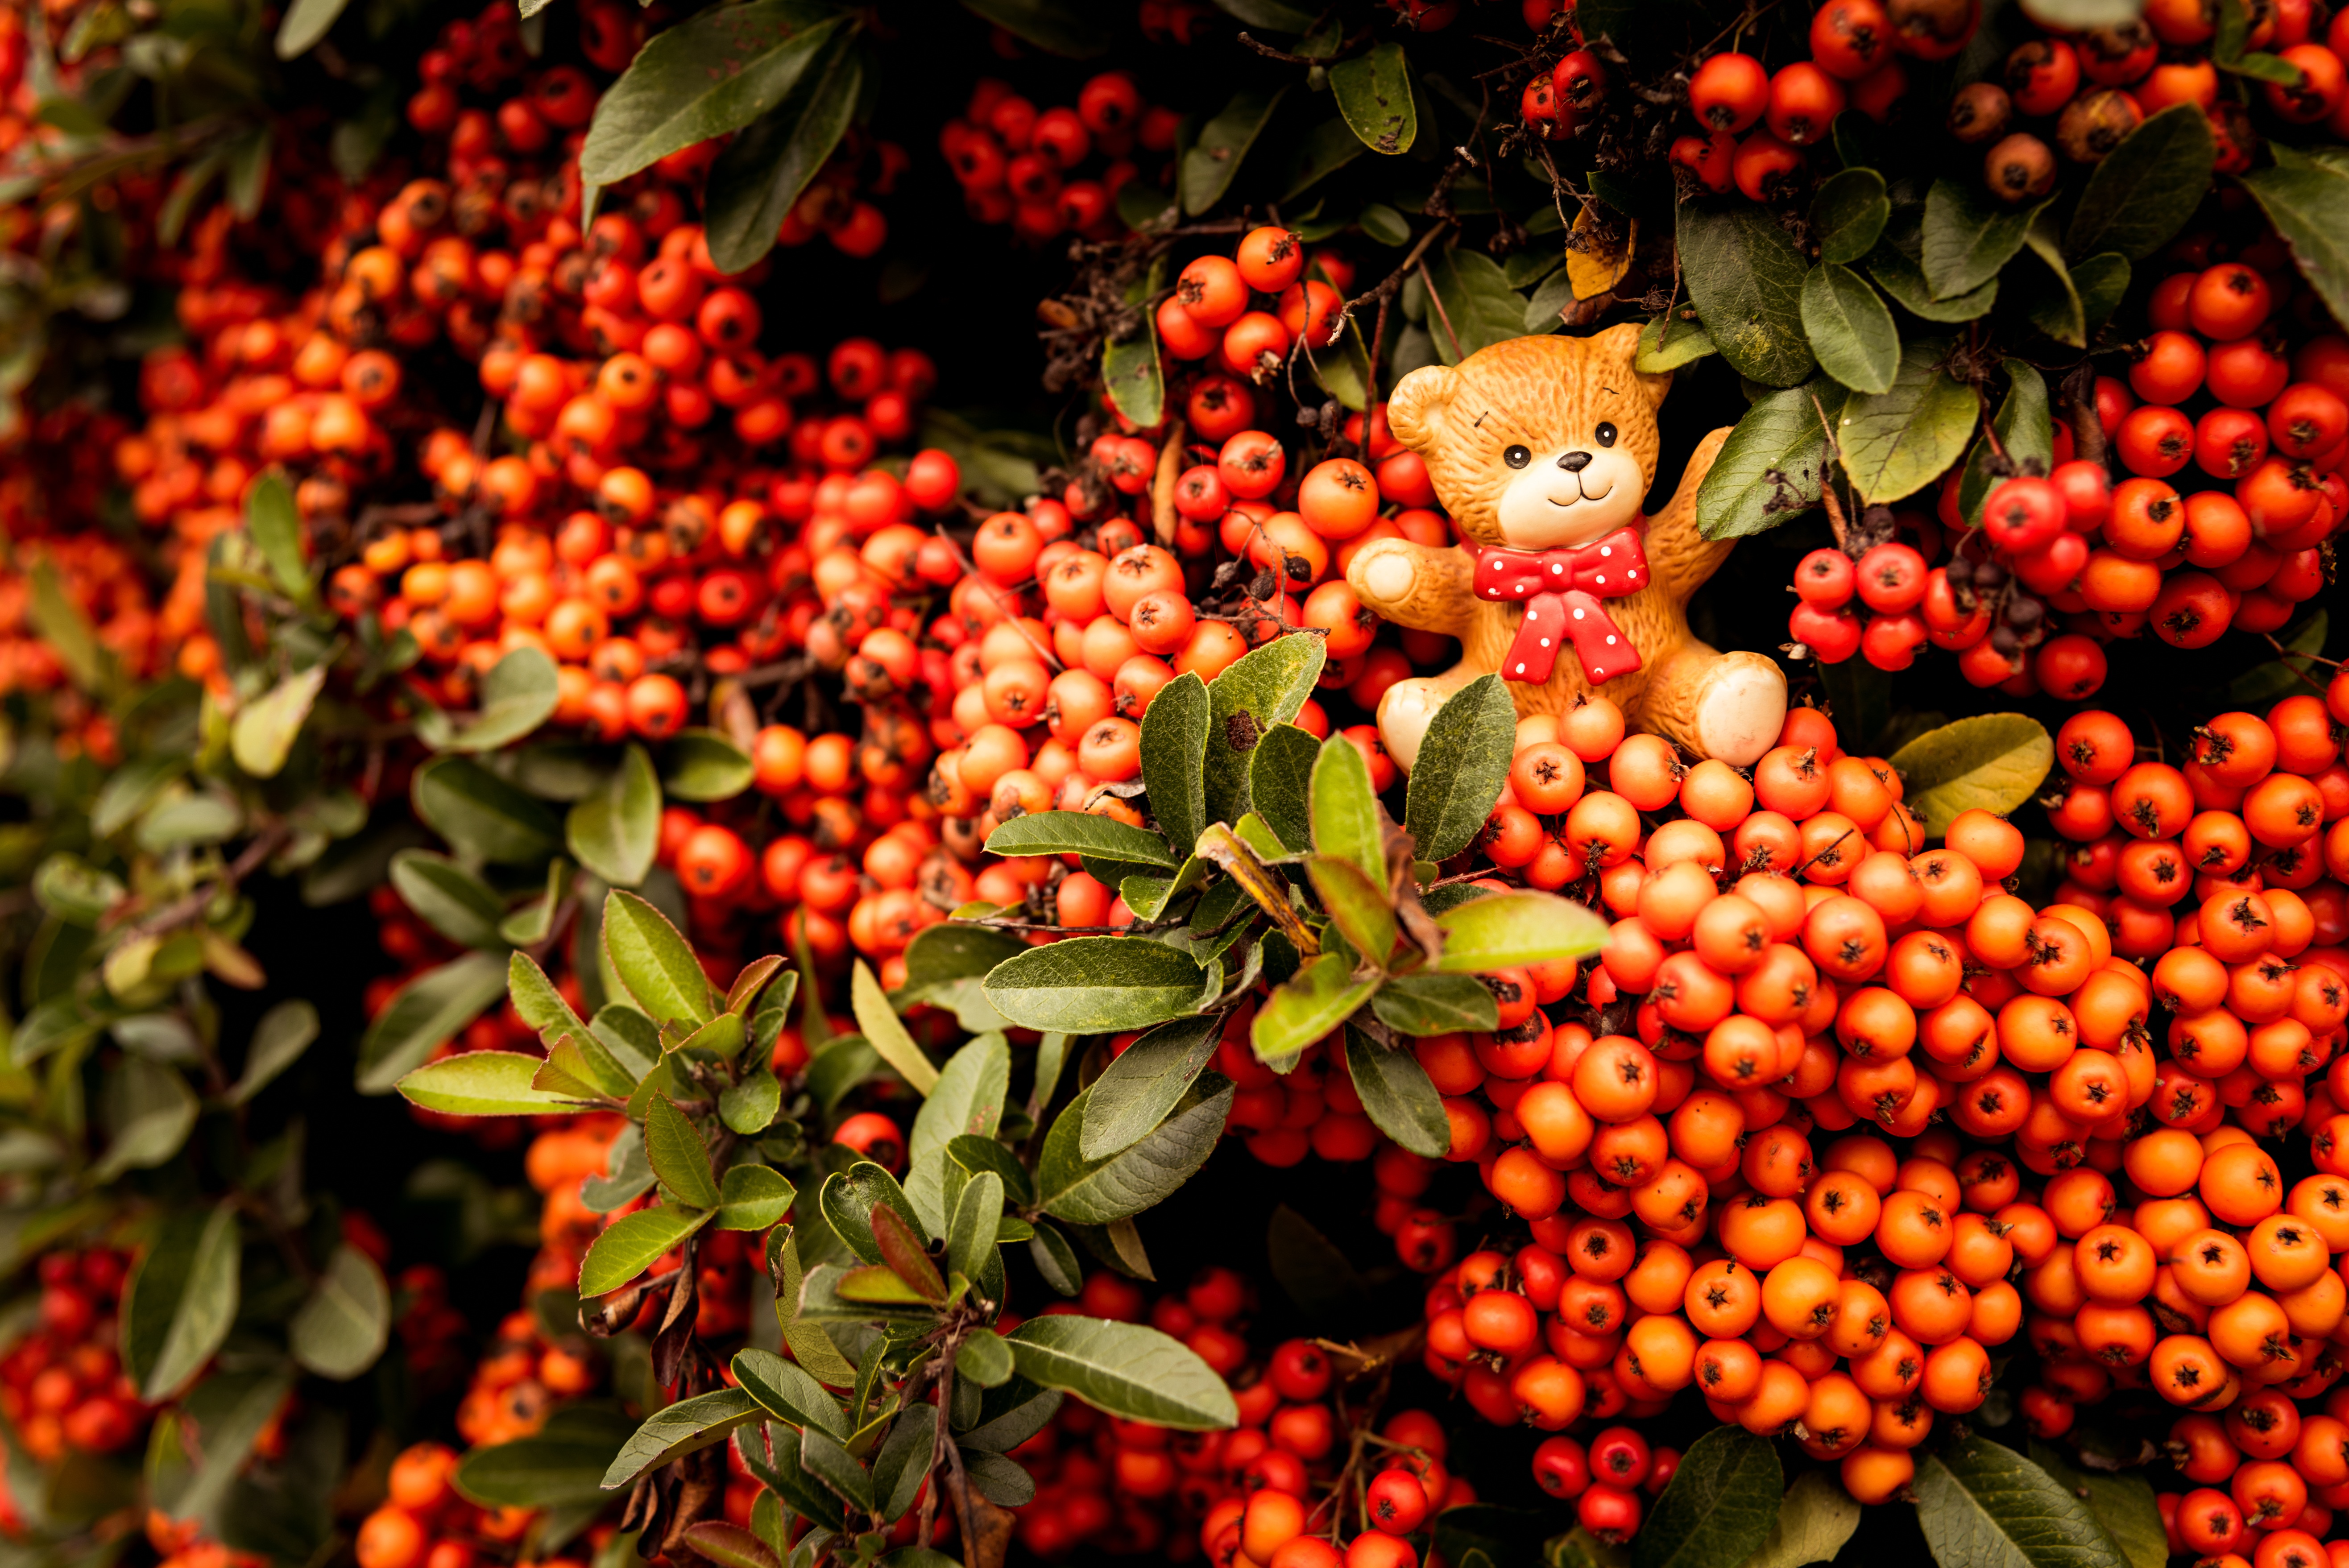 berries, miscellanea, miscellaneous, branches, bear, toy, bunch, rowan cell phone wallpapers